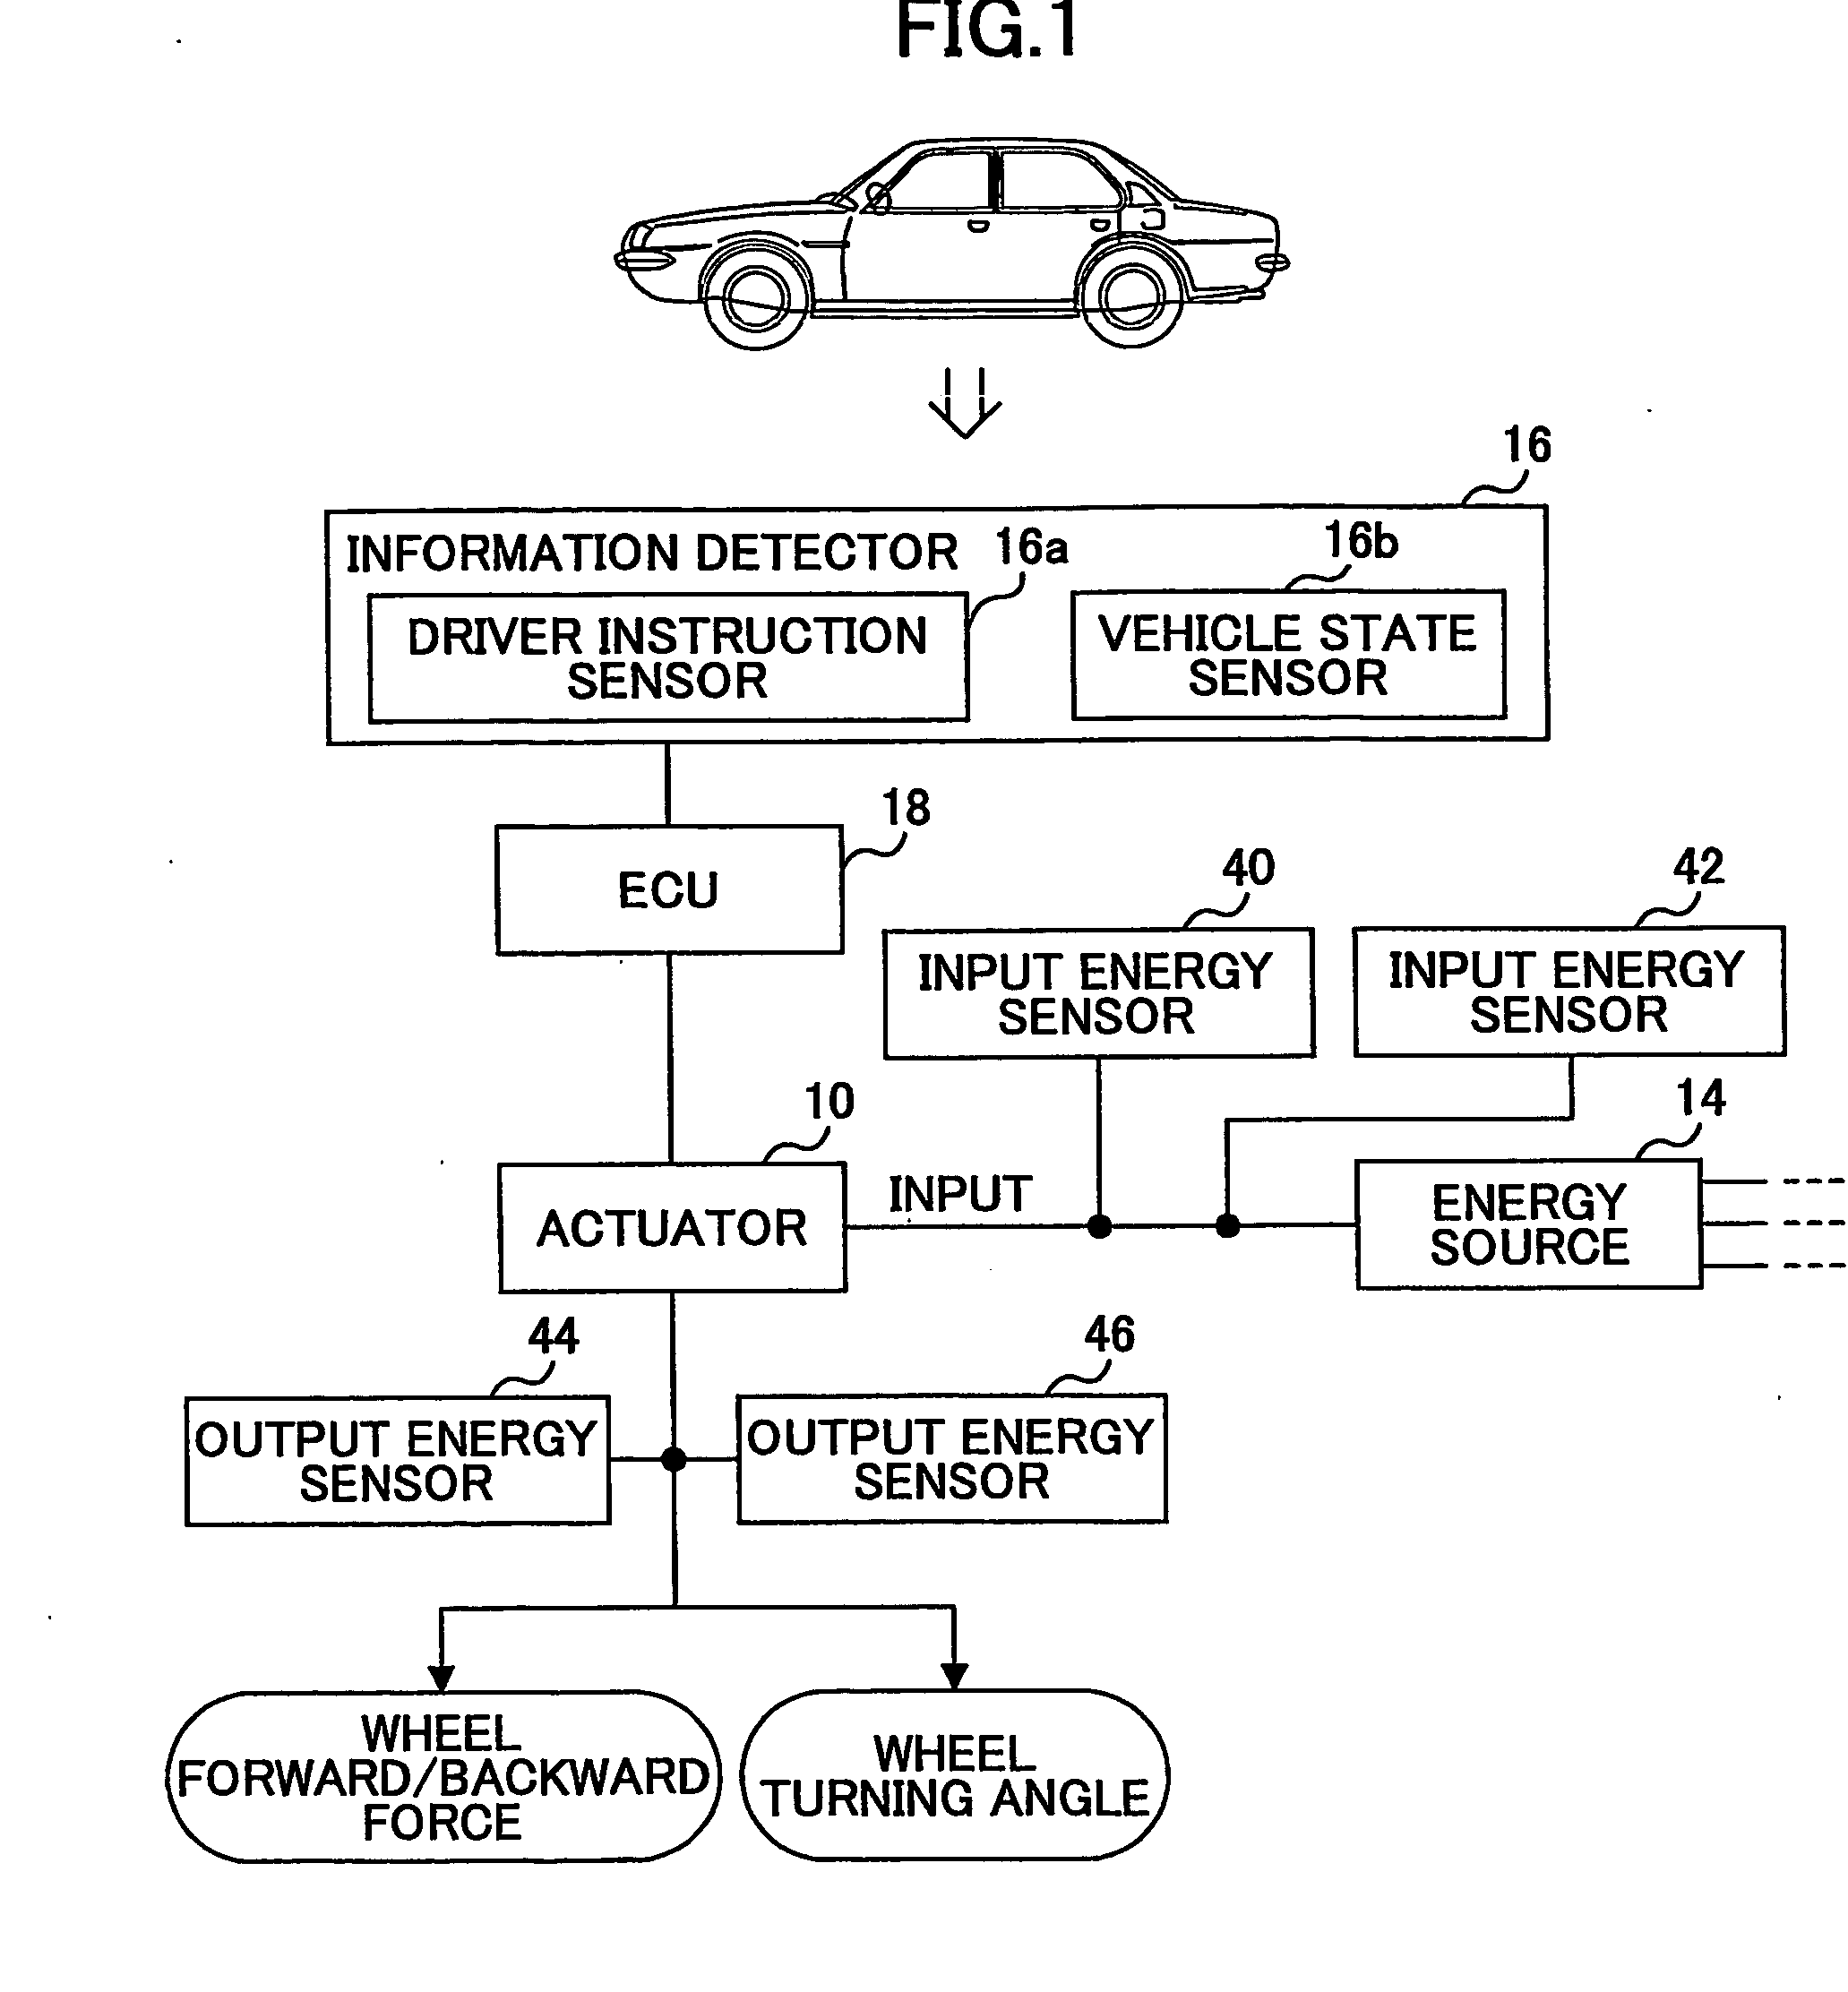 Energy management apparatus and method